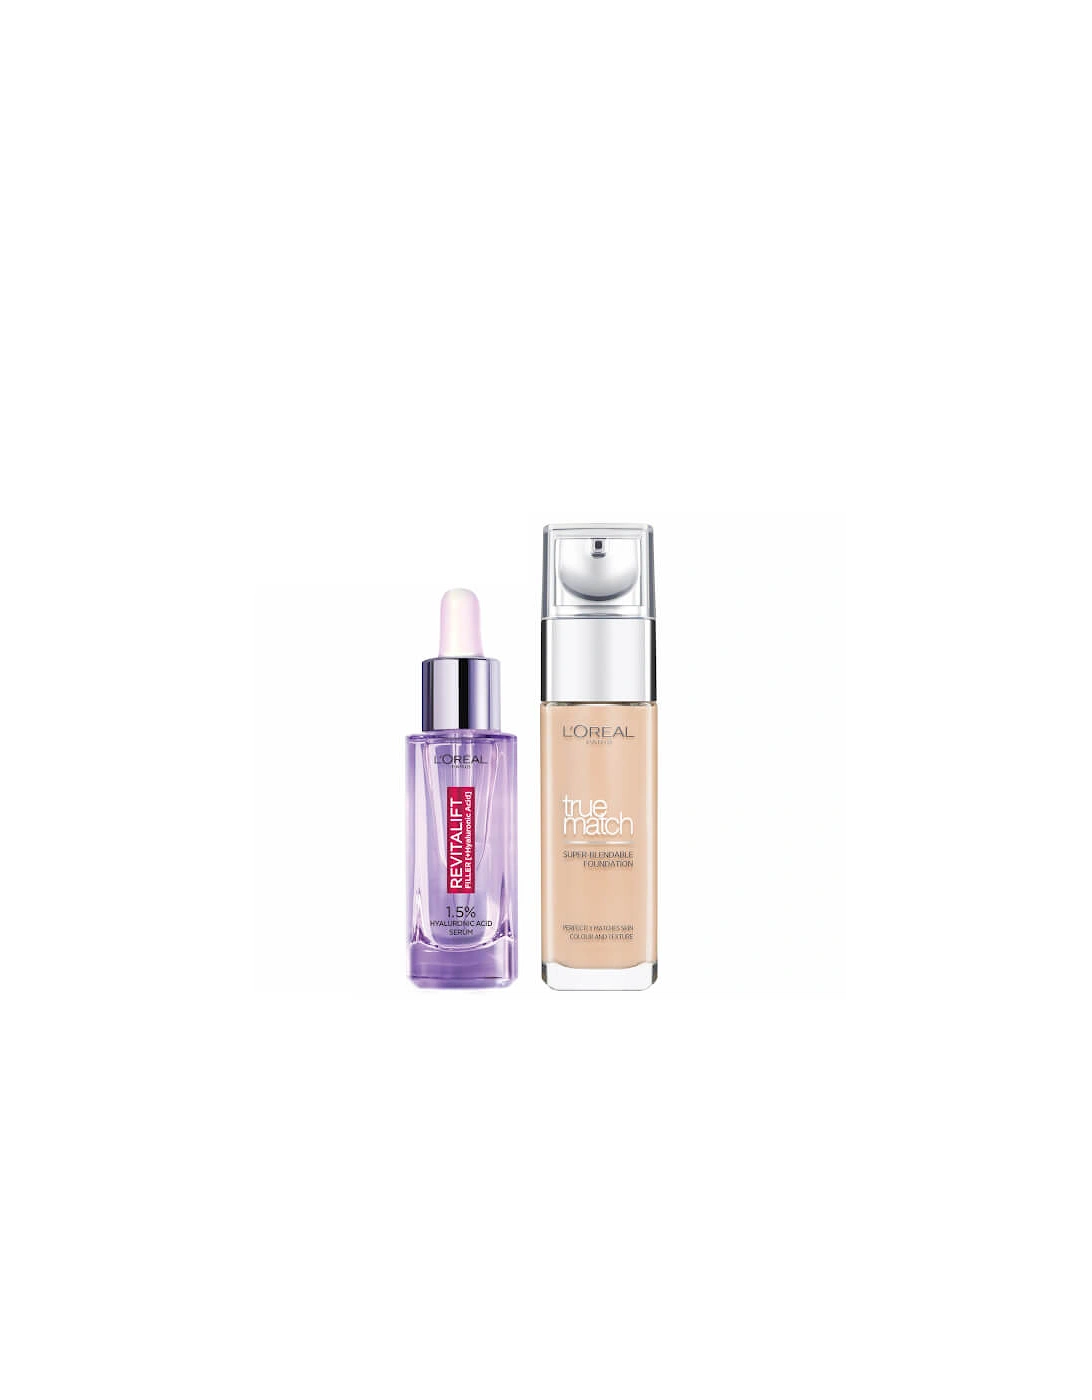 L’Oreal Paris Hyaluronic Acid Filler Serum and True Match Hyaluronic Acid Foundation Duo - 7W Golden Amber, 2 of 1